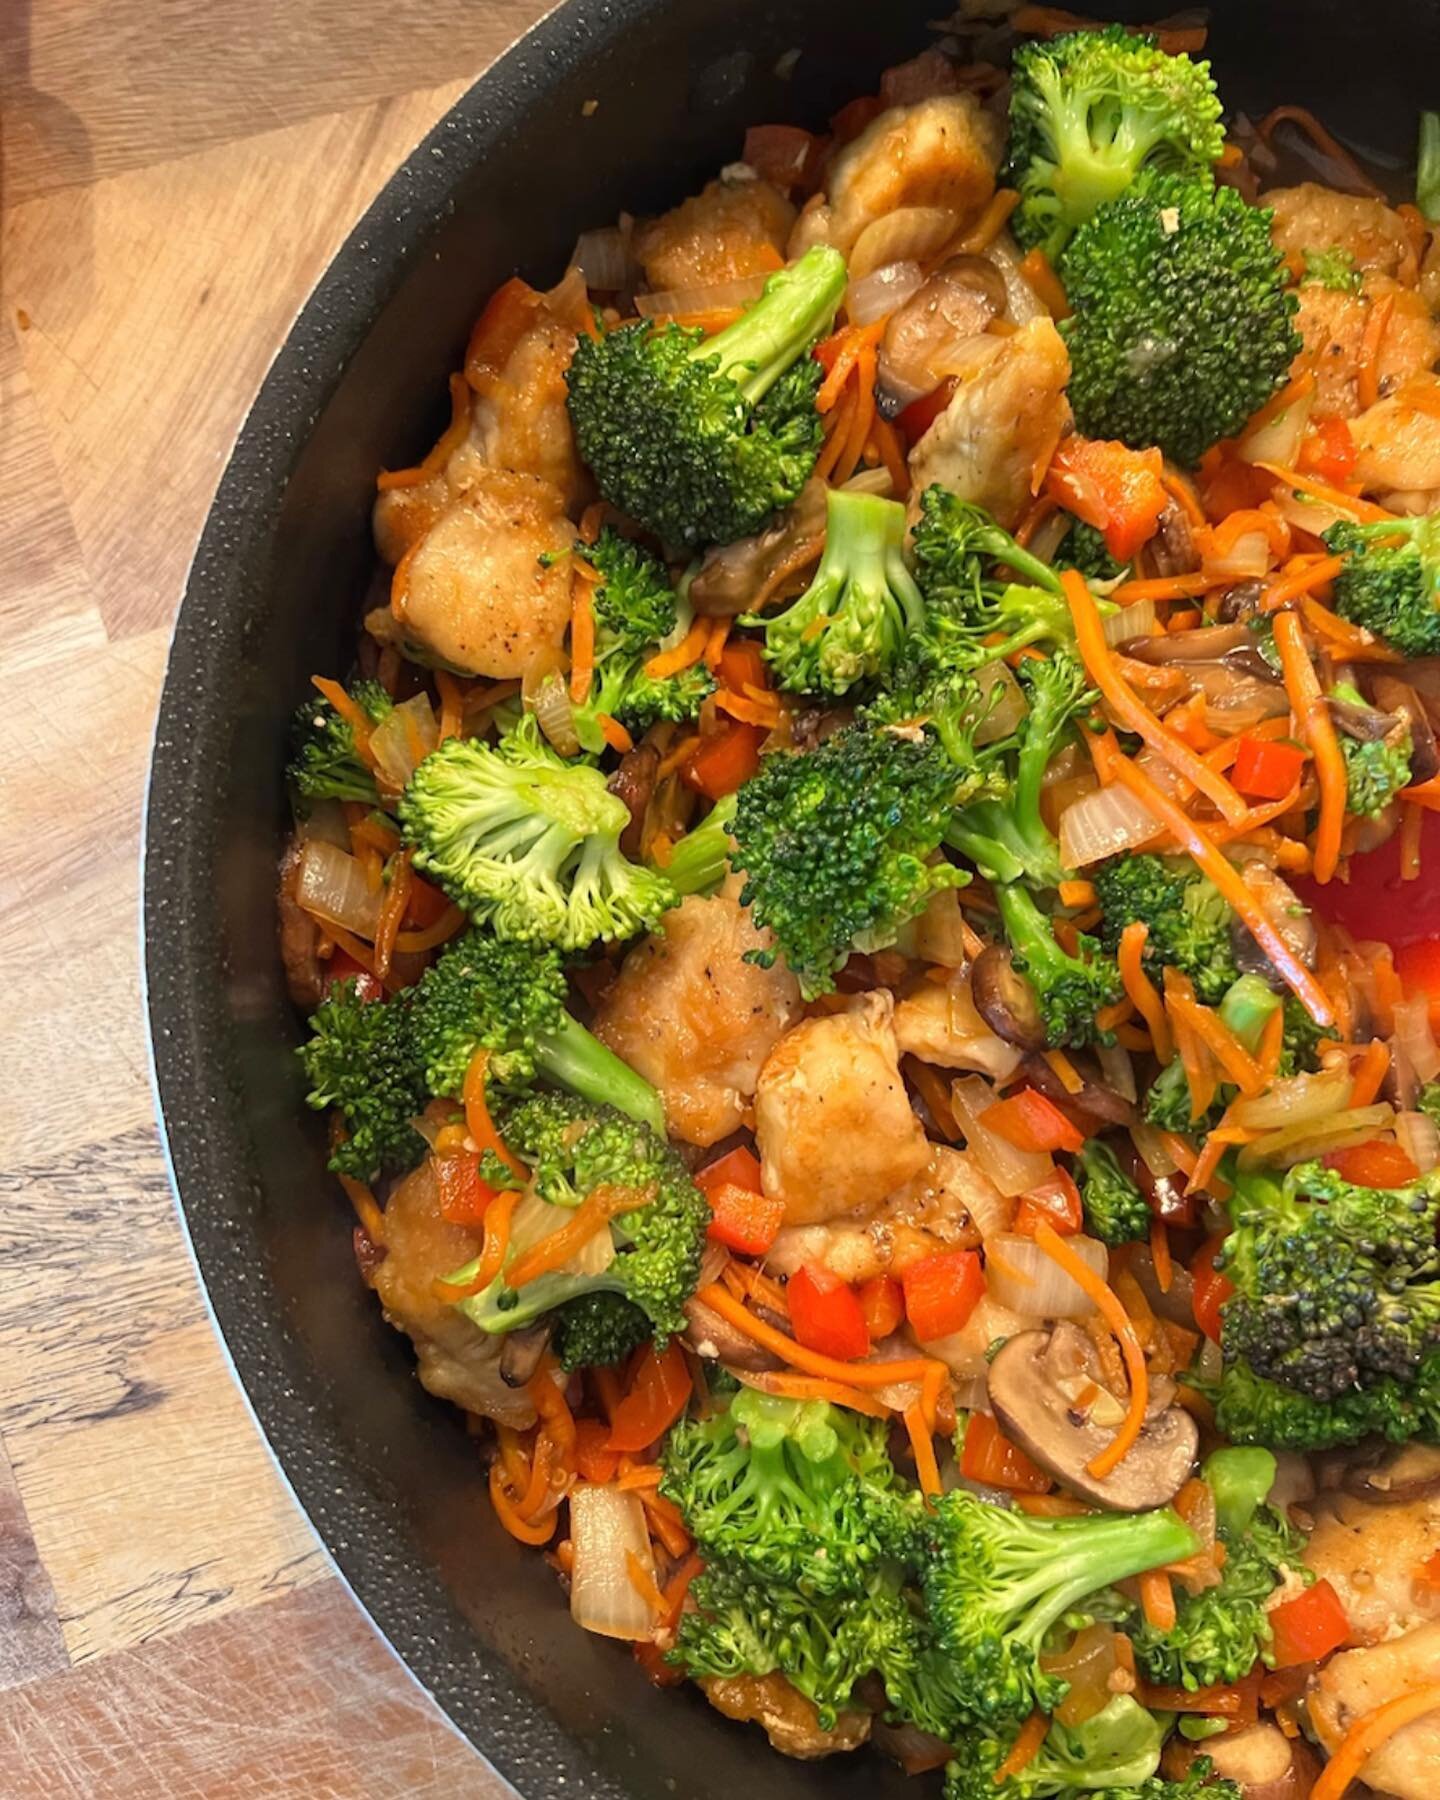 Low carb Stirfry loaded with Veggies 🥦